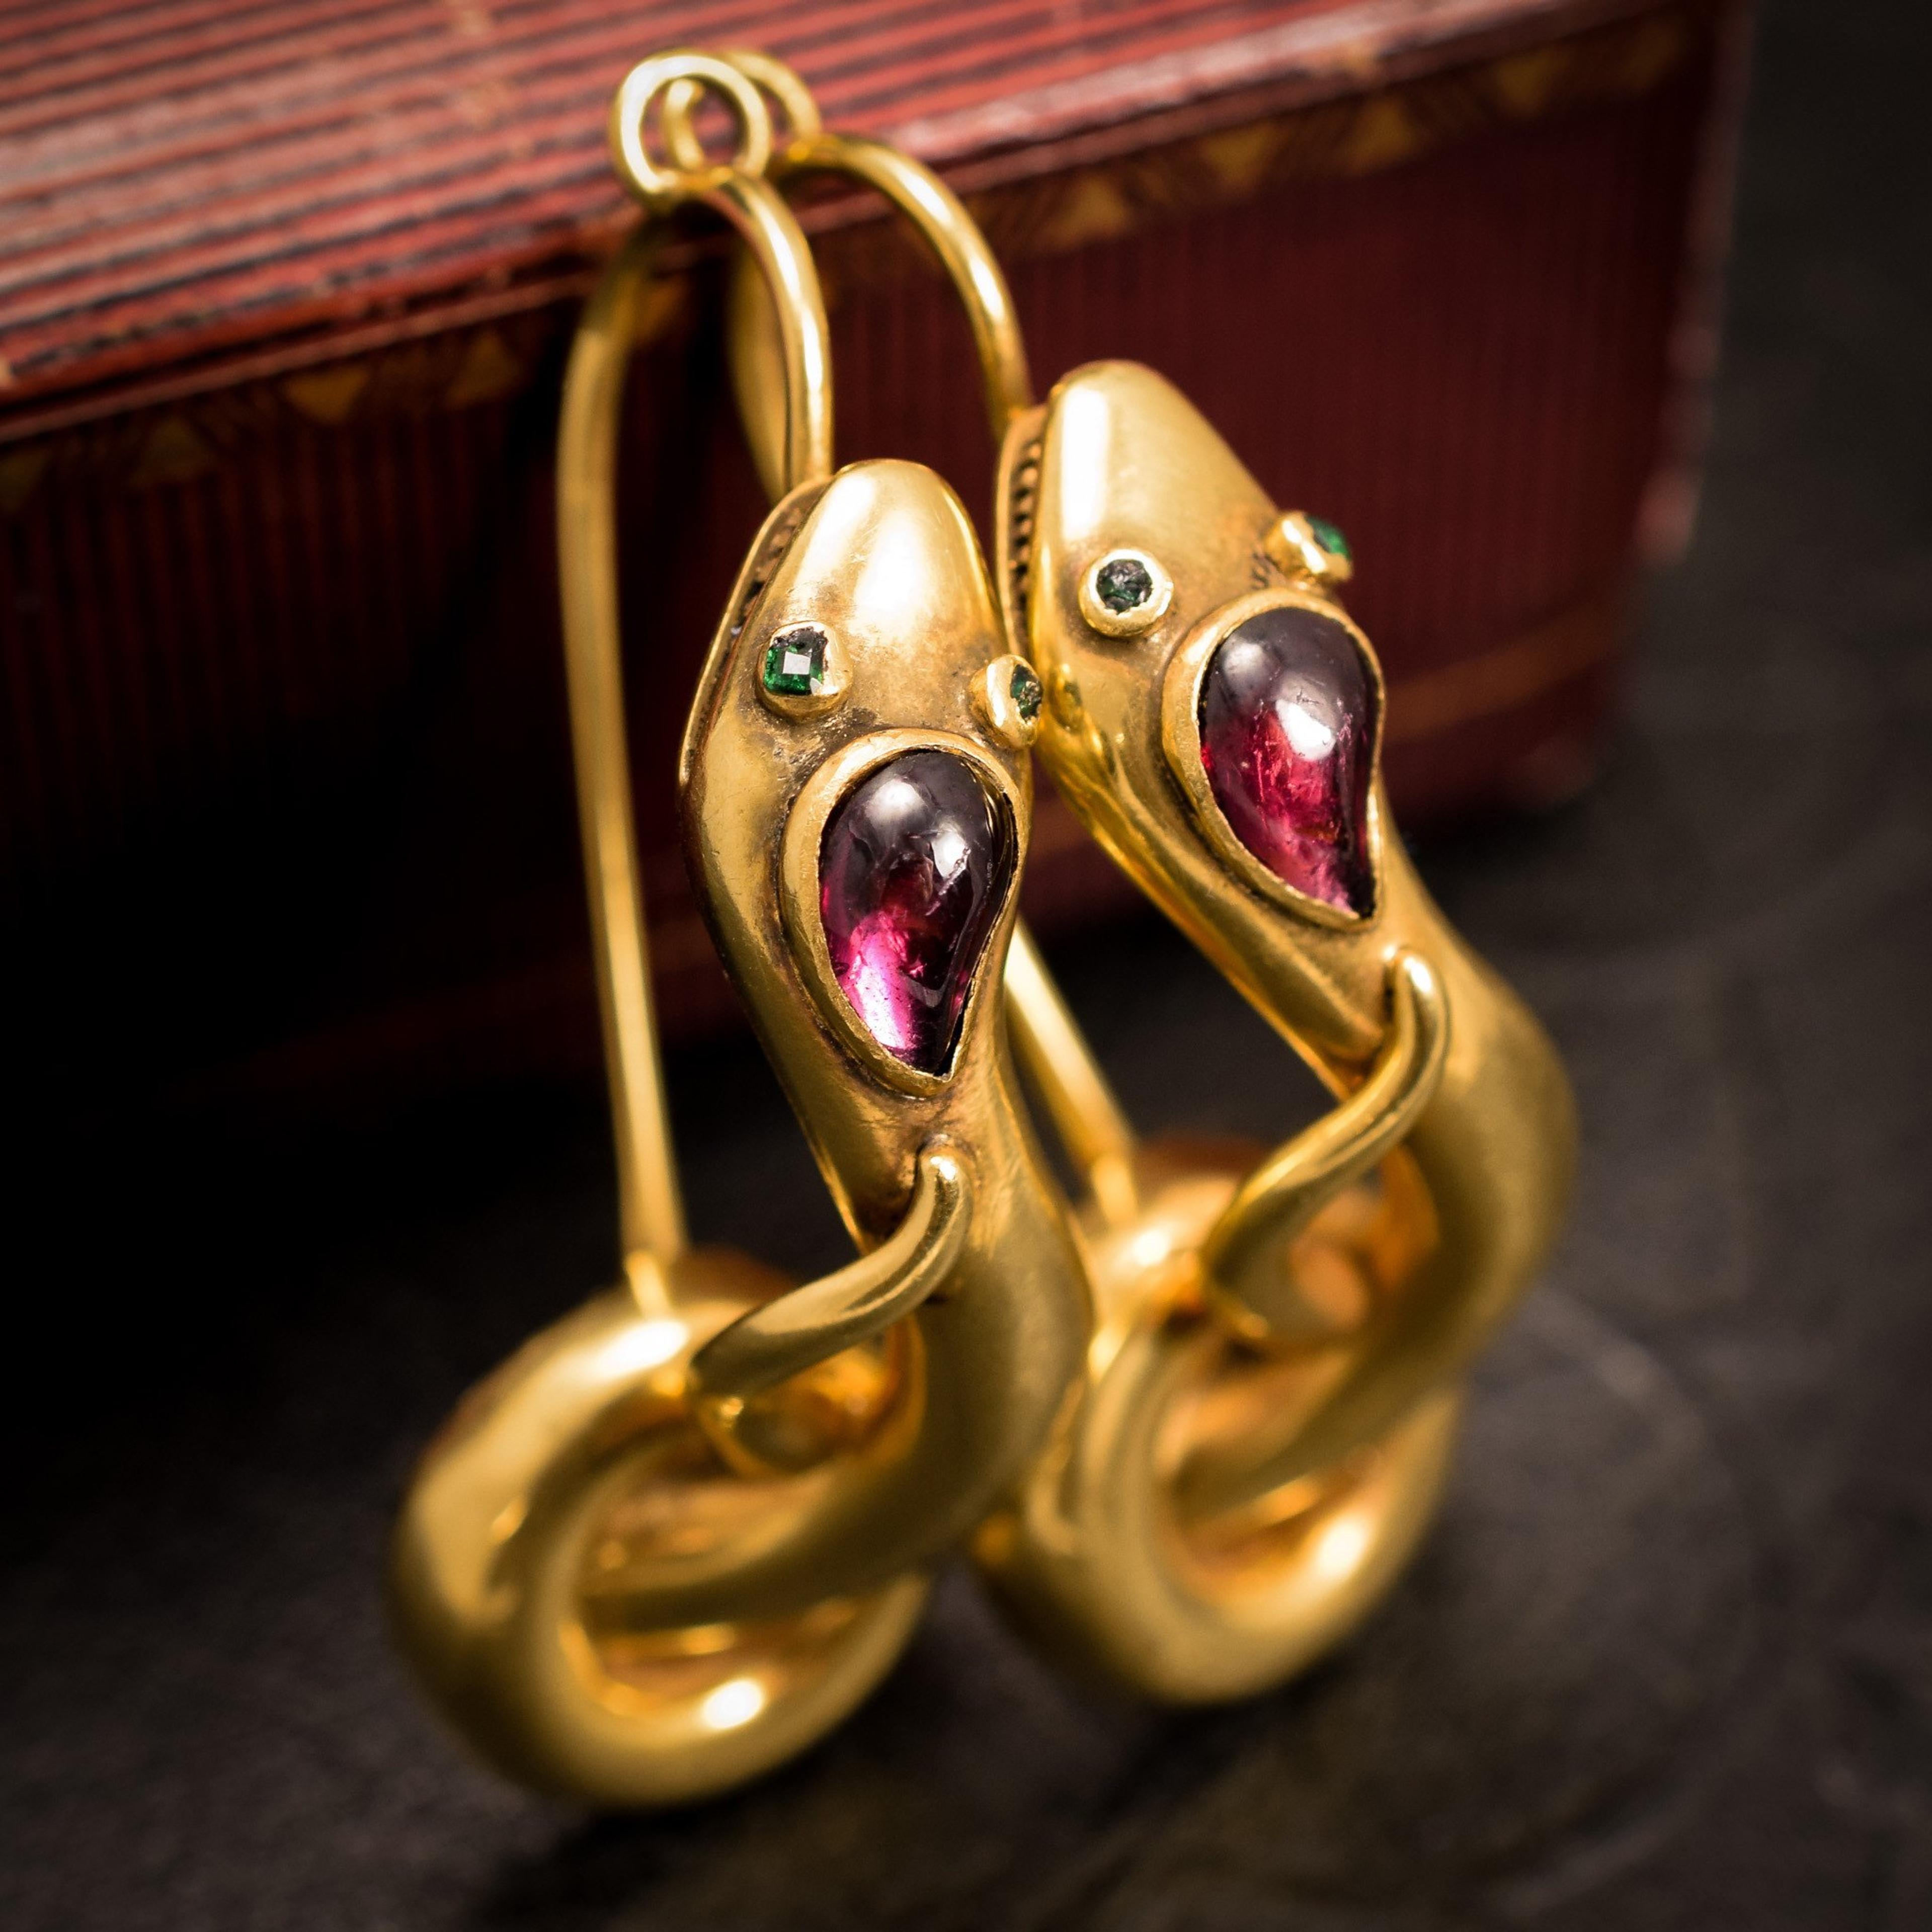 Detail of Serpent Earrings with Garnet Cabochons and Emerald Eyes